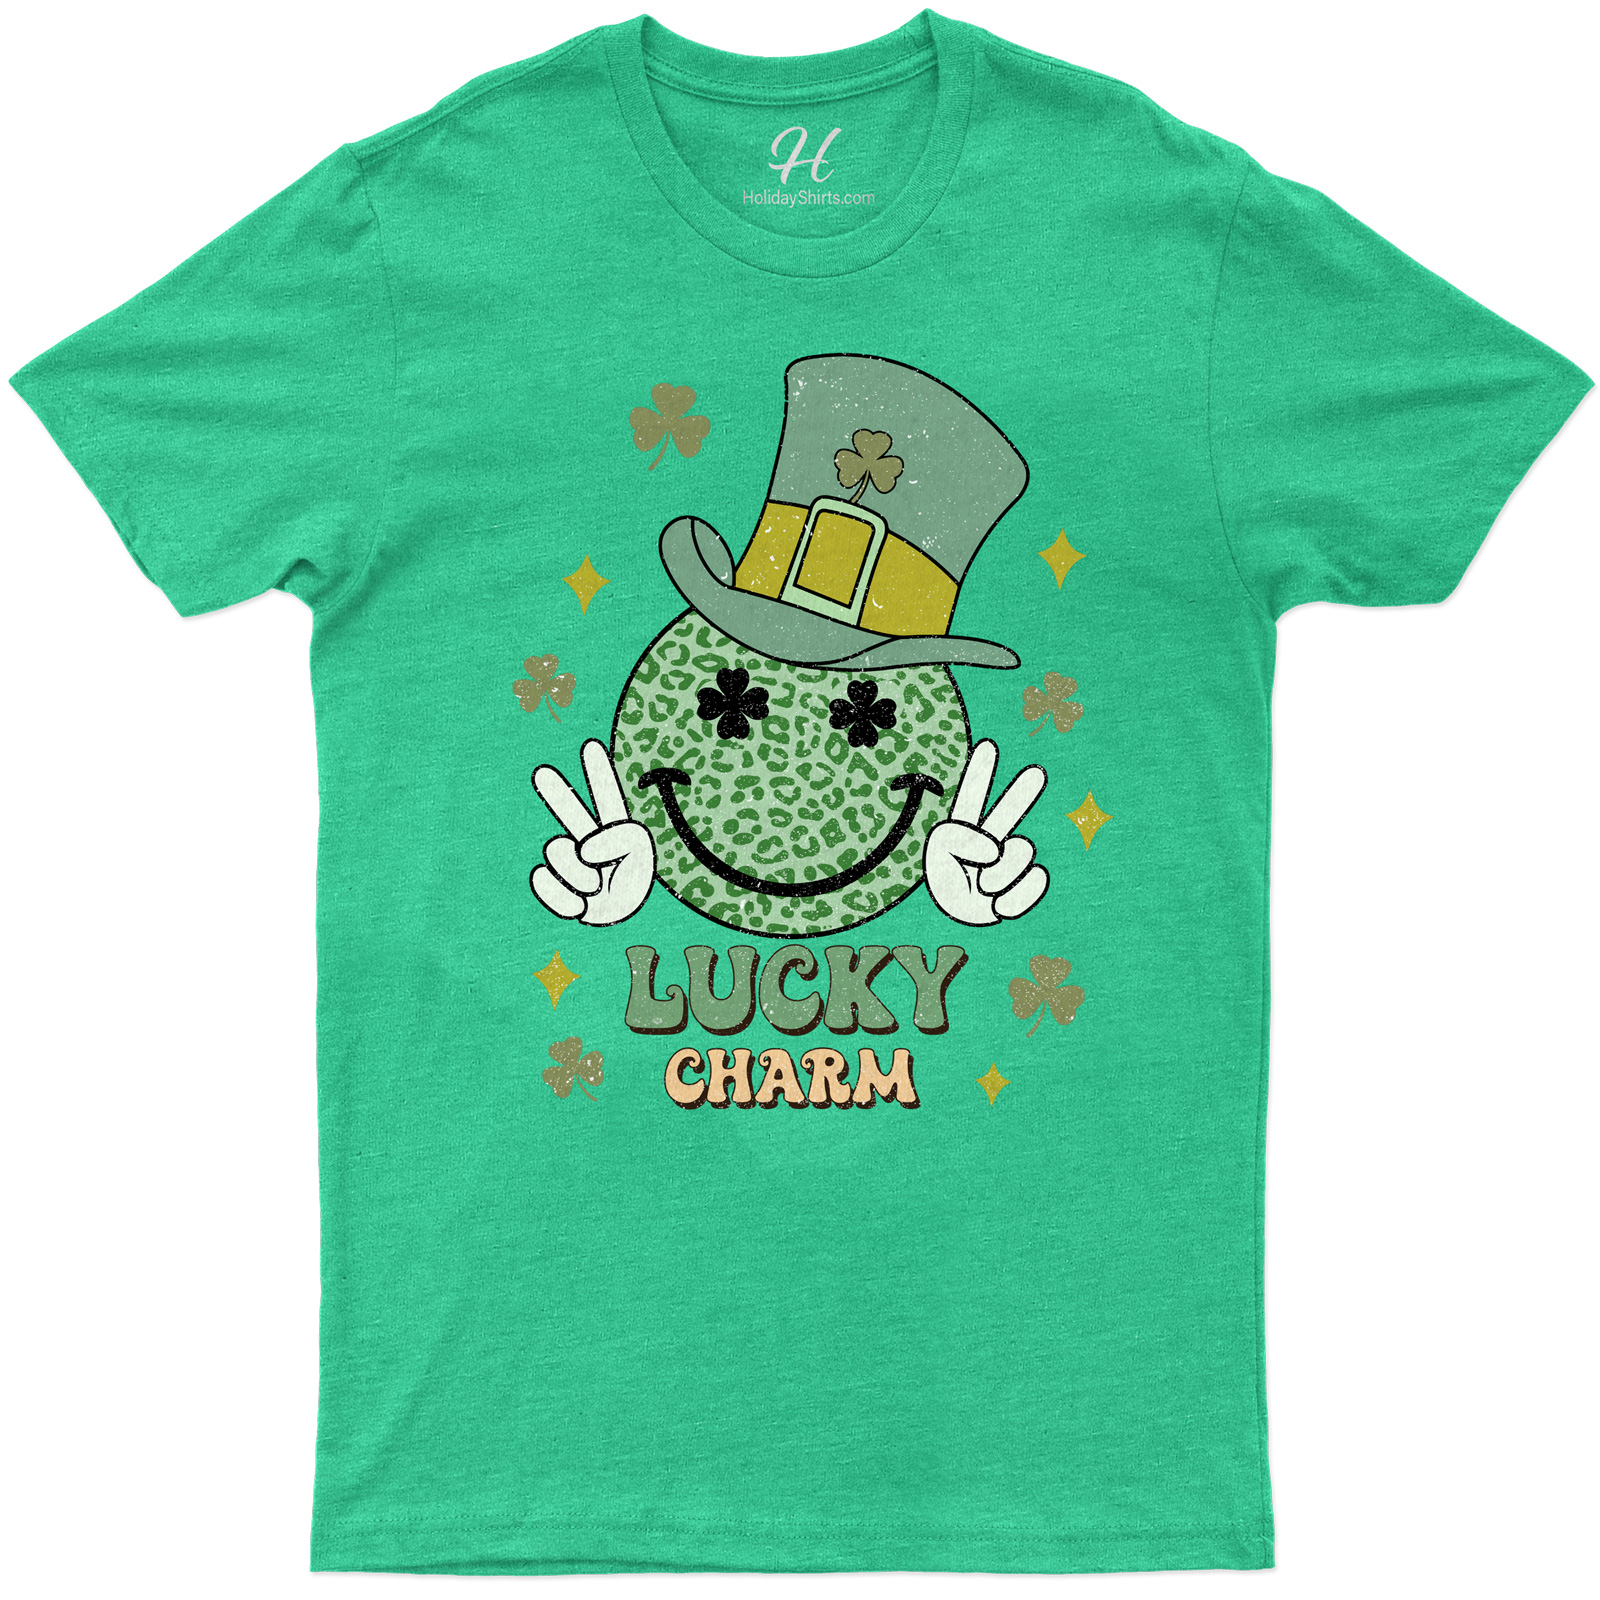 Festive Lucky Charm Smiley Face St. Patrick's Day Tee With Hat And Clover Accents